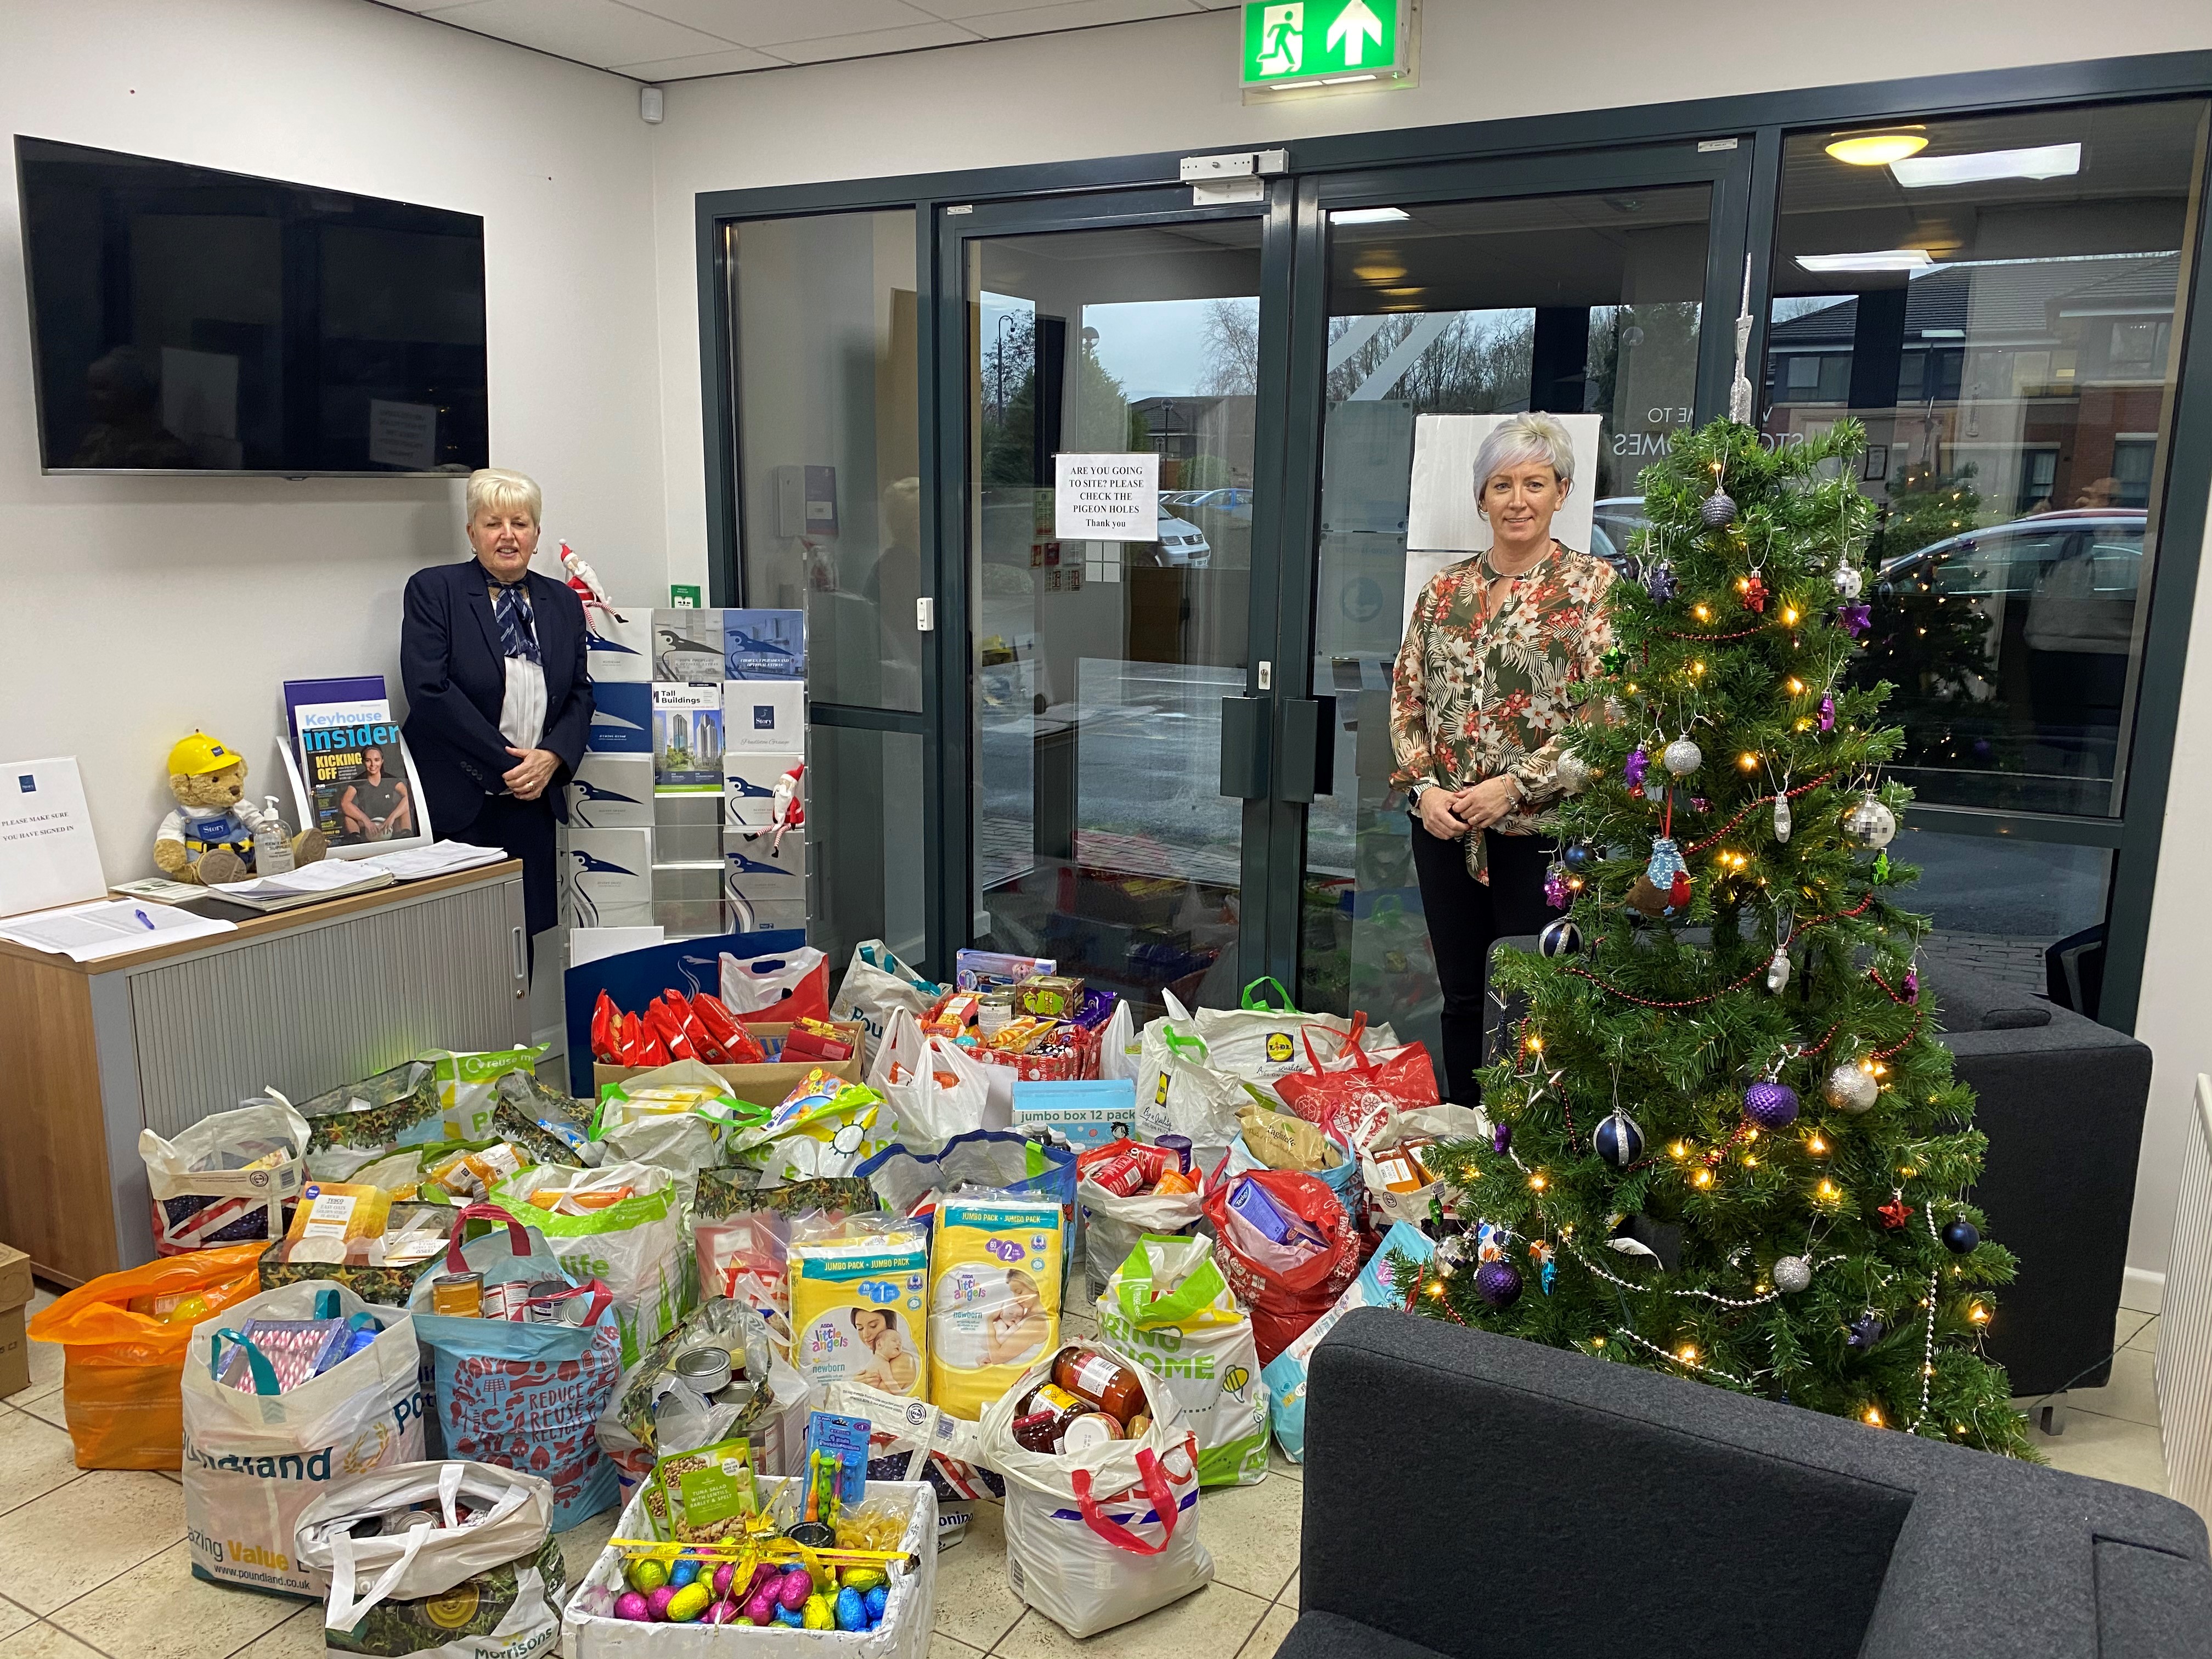 Story Homes donates more than 1,000 items to families in need across Lancashire, Cumbria and Newcastle